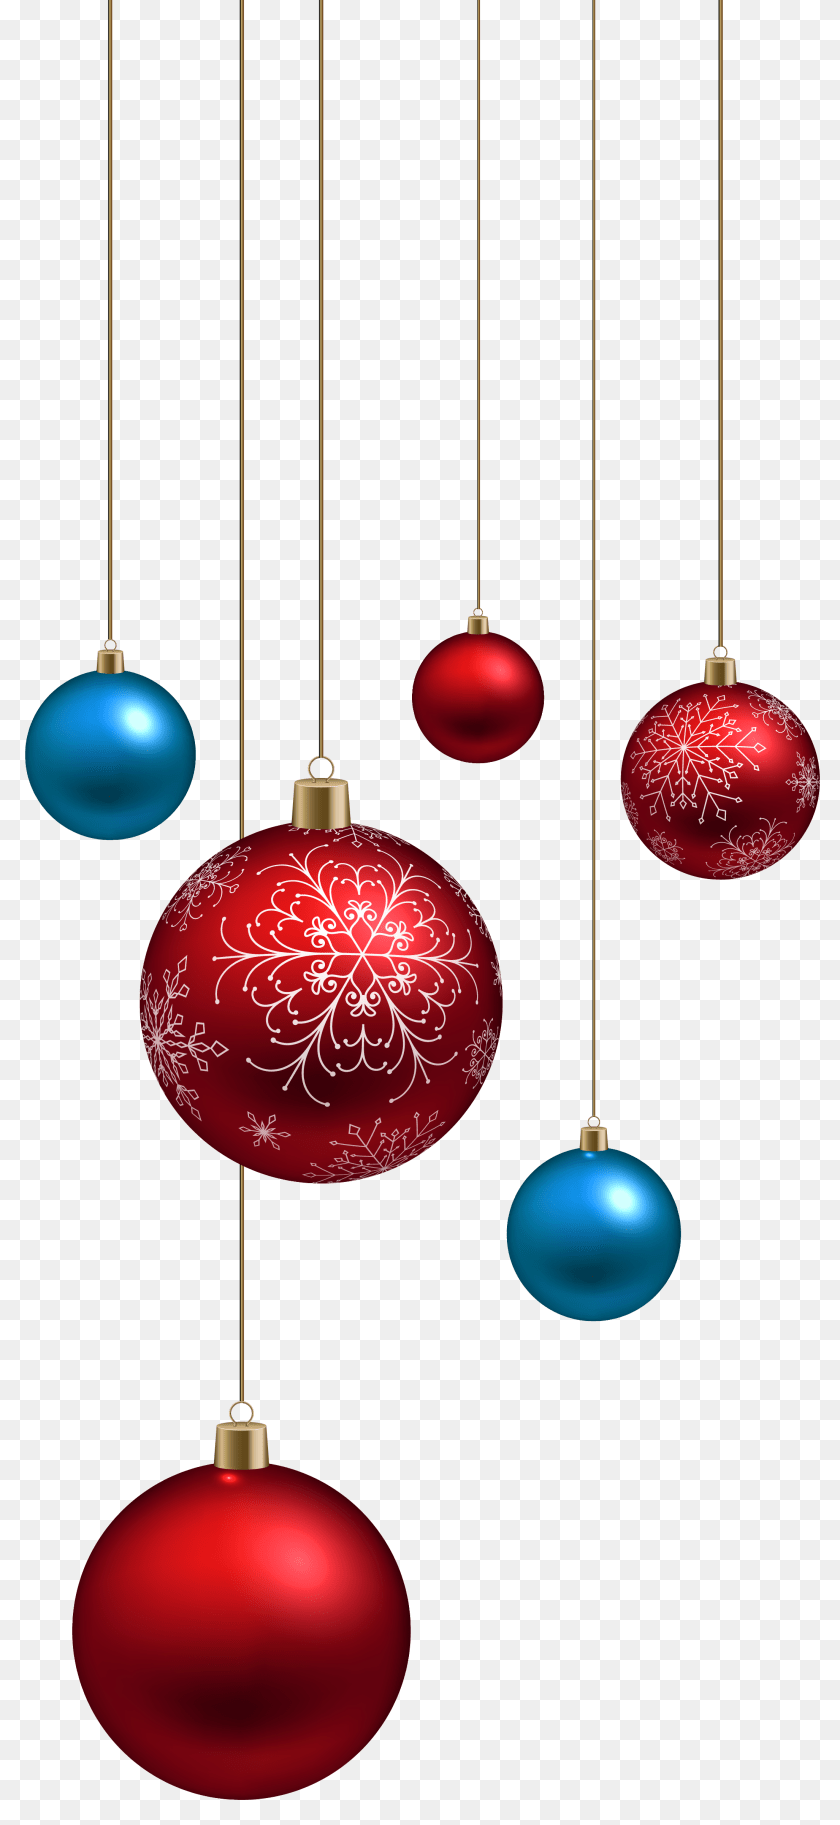 2210x4802 Hd Blue Glitter Christmas Ornaments Christmas Christmas Ball Ball Hanging Clipart, Lighting, Accessories, Lamp Transparent PNG